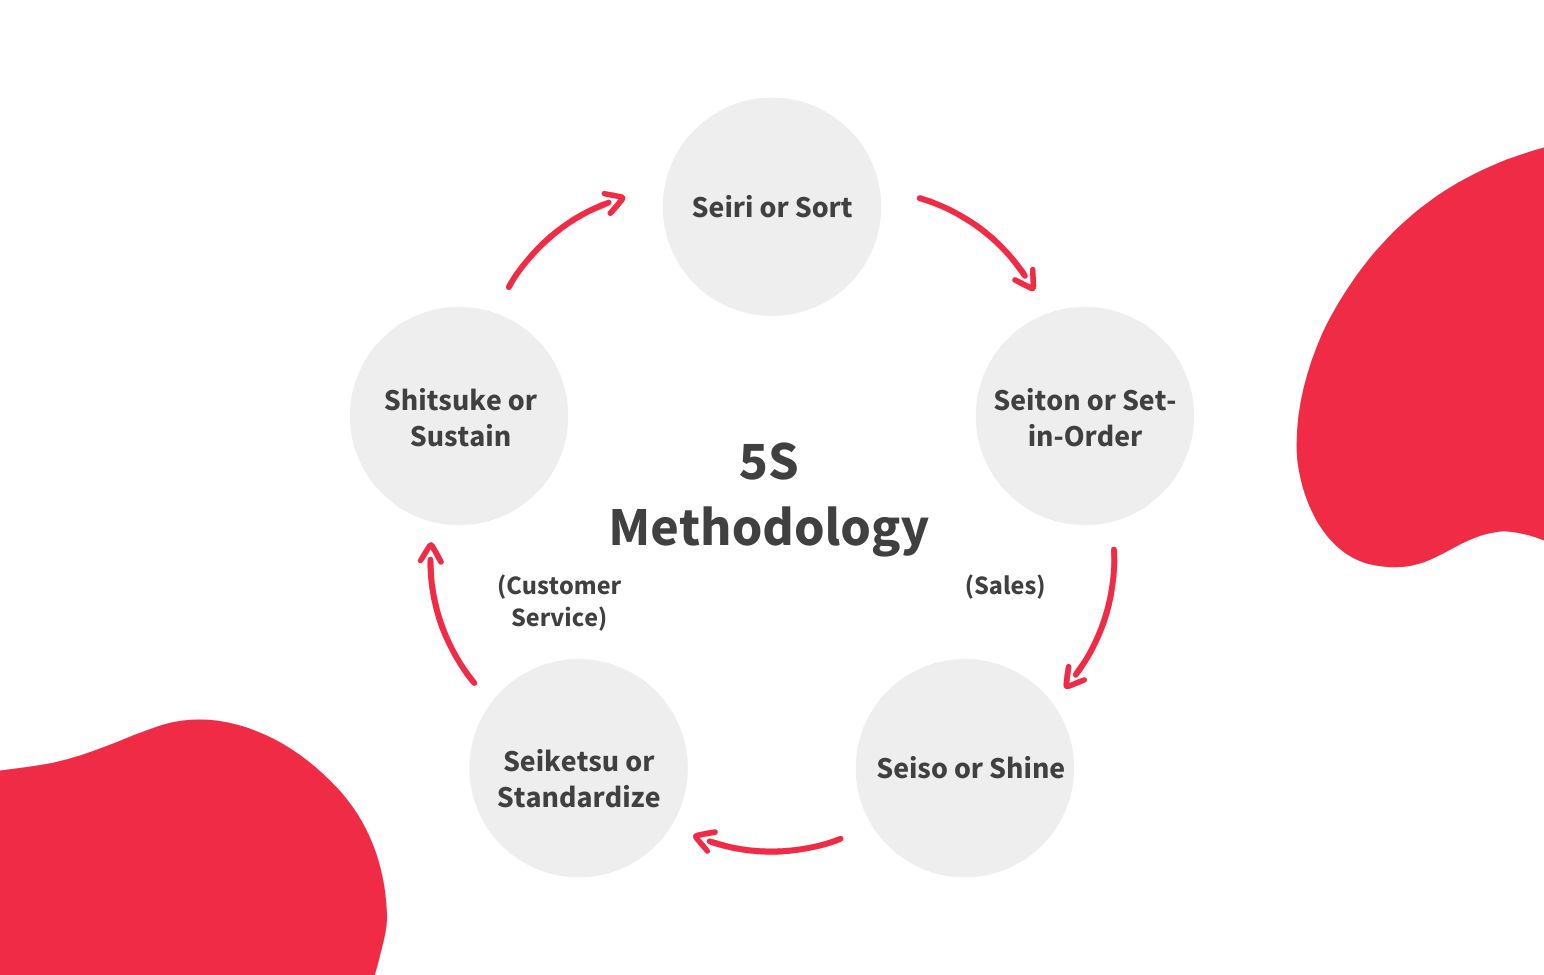 The 5S methodology visualized as a five-step repeating cycle.